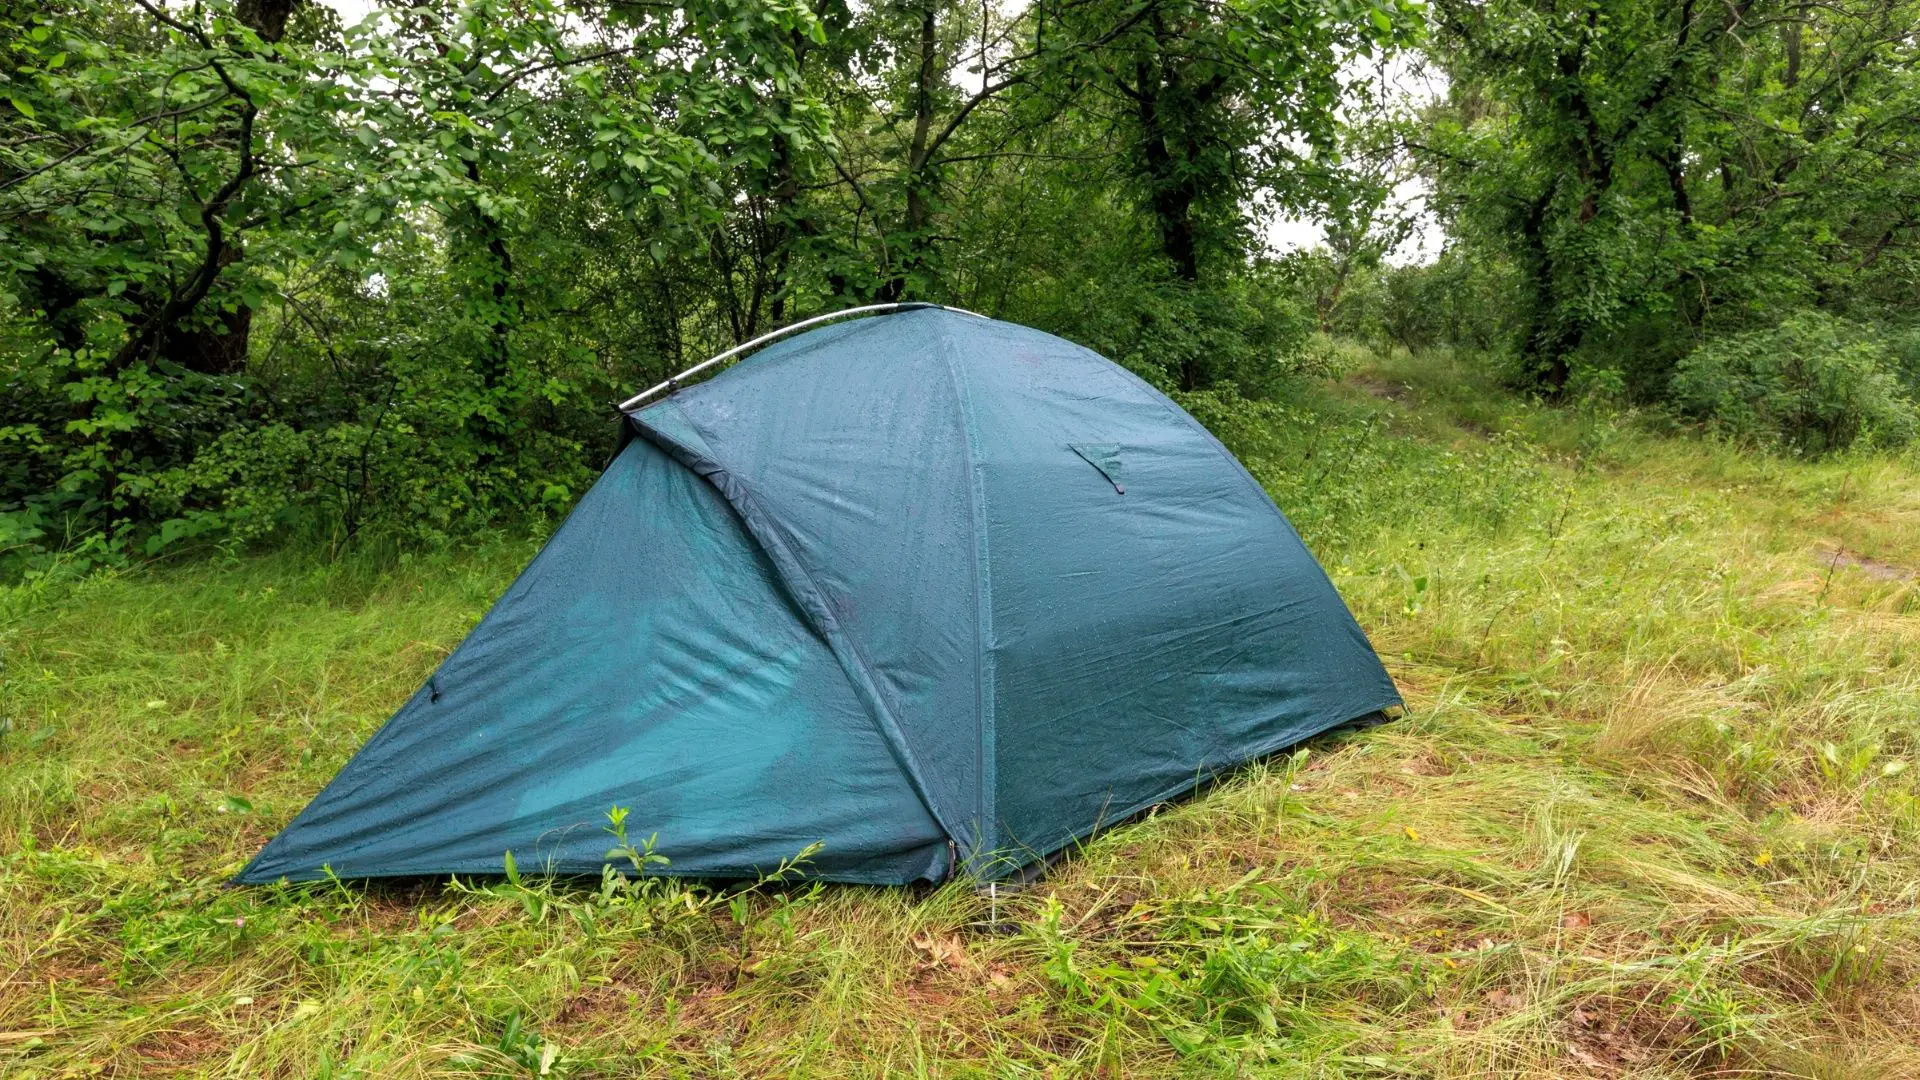 How To clean A Tent With Mold and Mildew